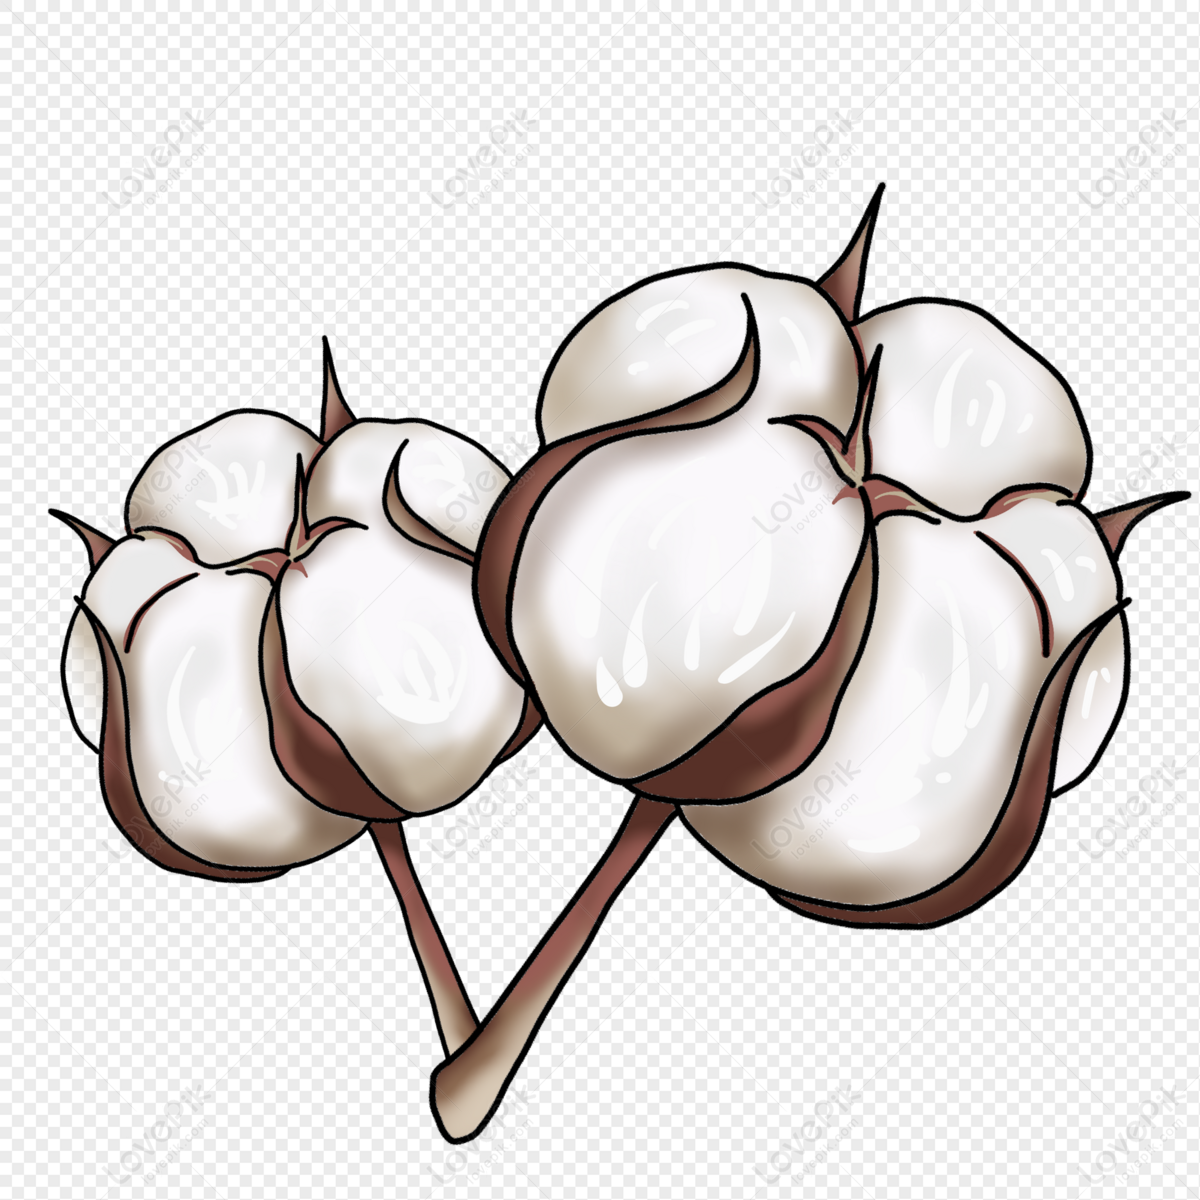 Cartoon White Cotton Illustration PNG Image Free Download And Clipart Image  For Free Download - Lovepik | 401531531